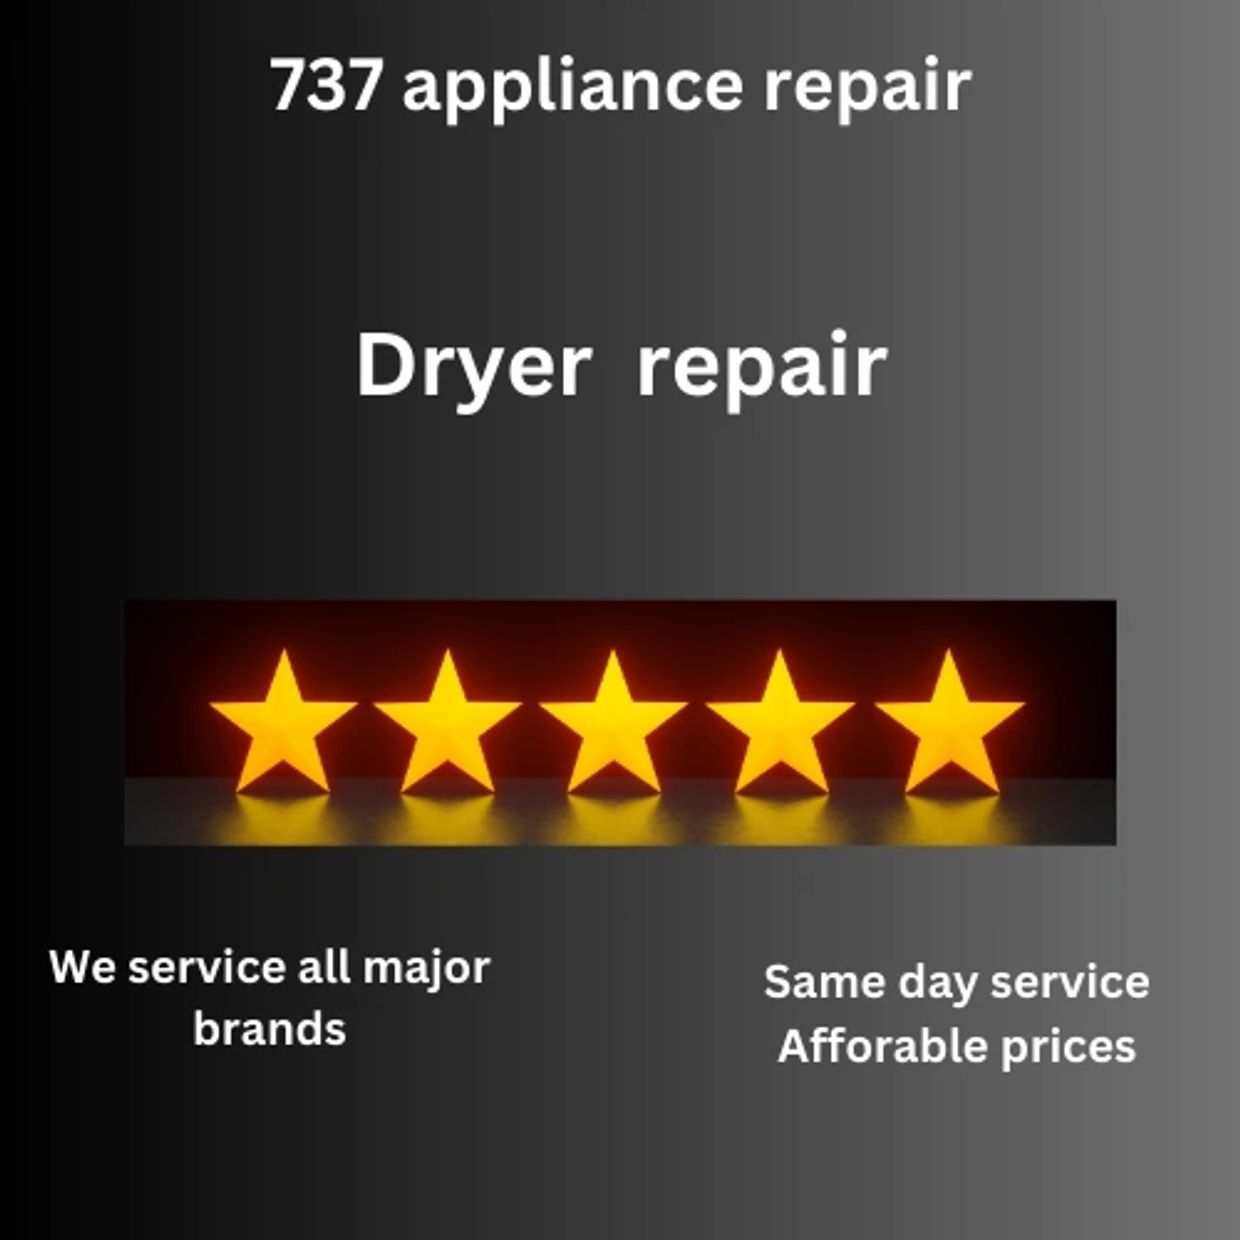 Dryer repair service in South West Austin area